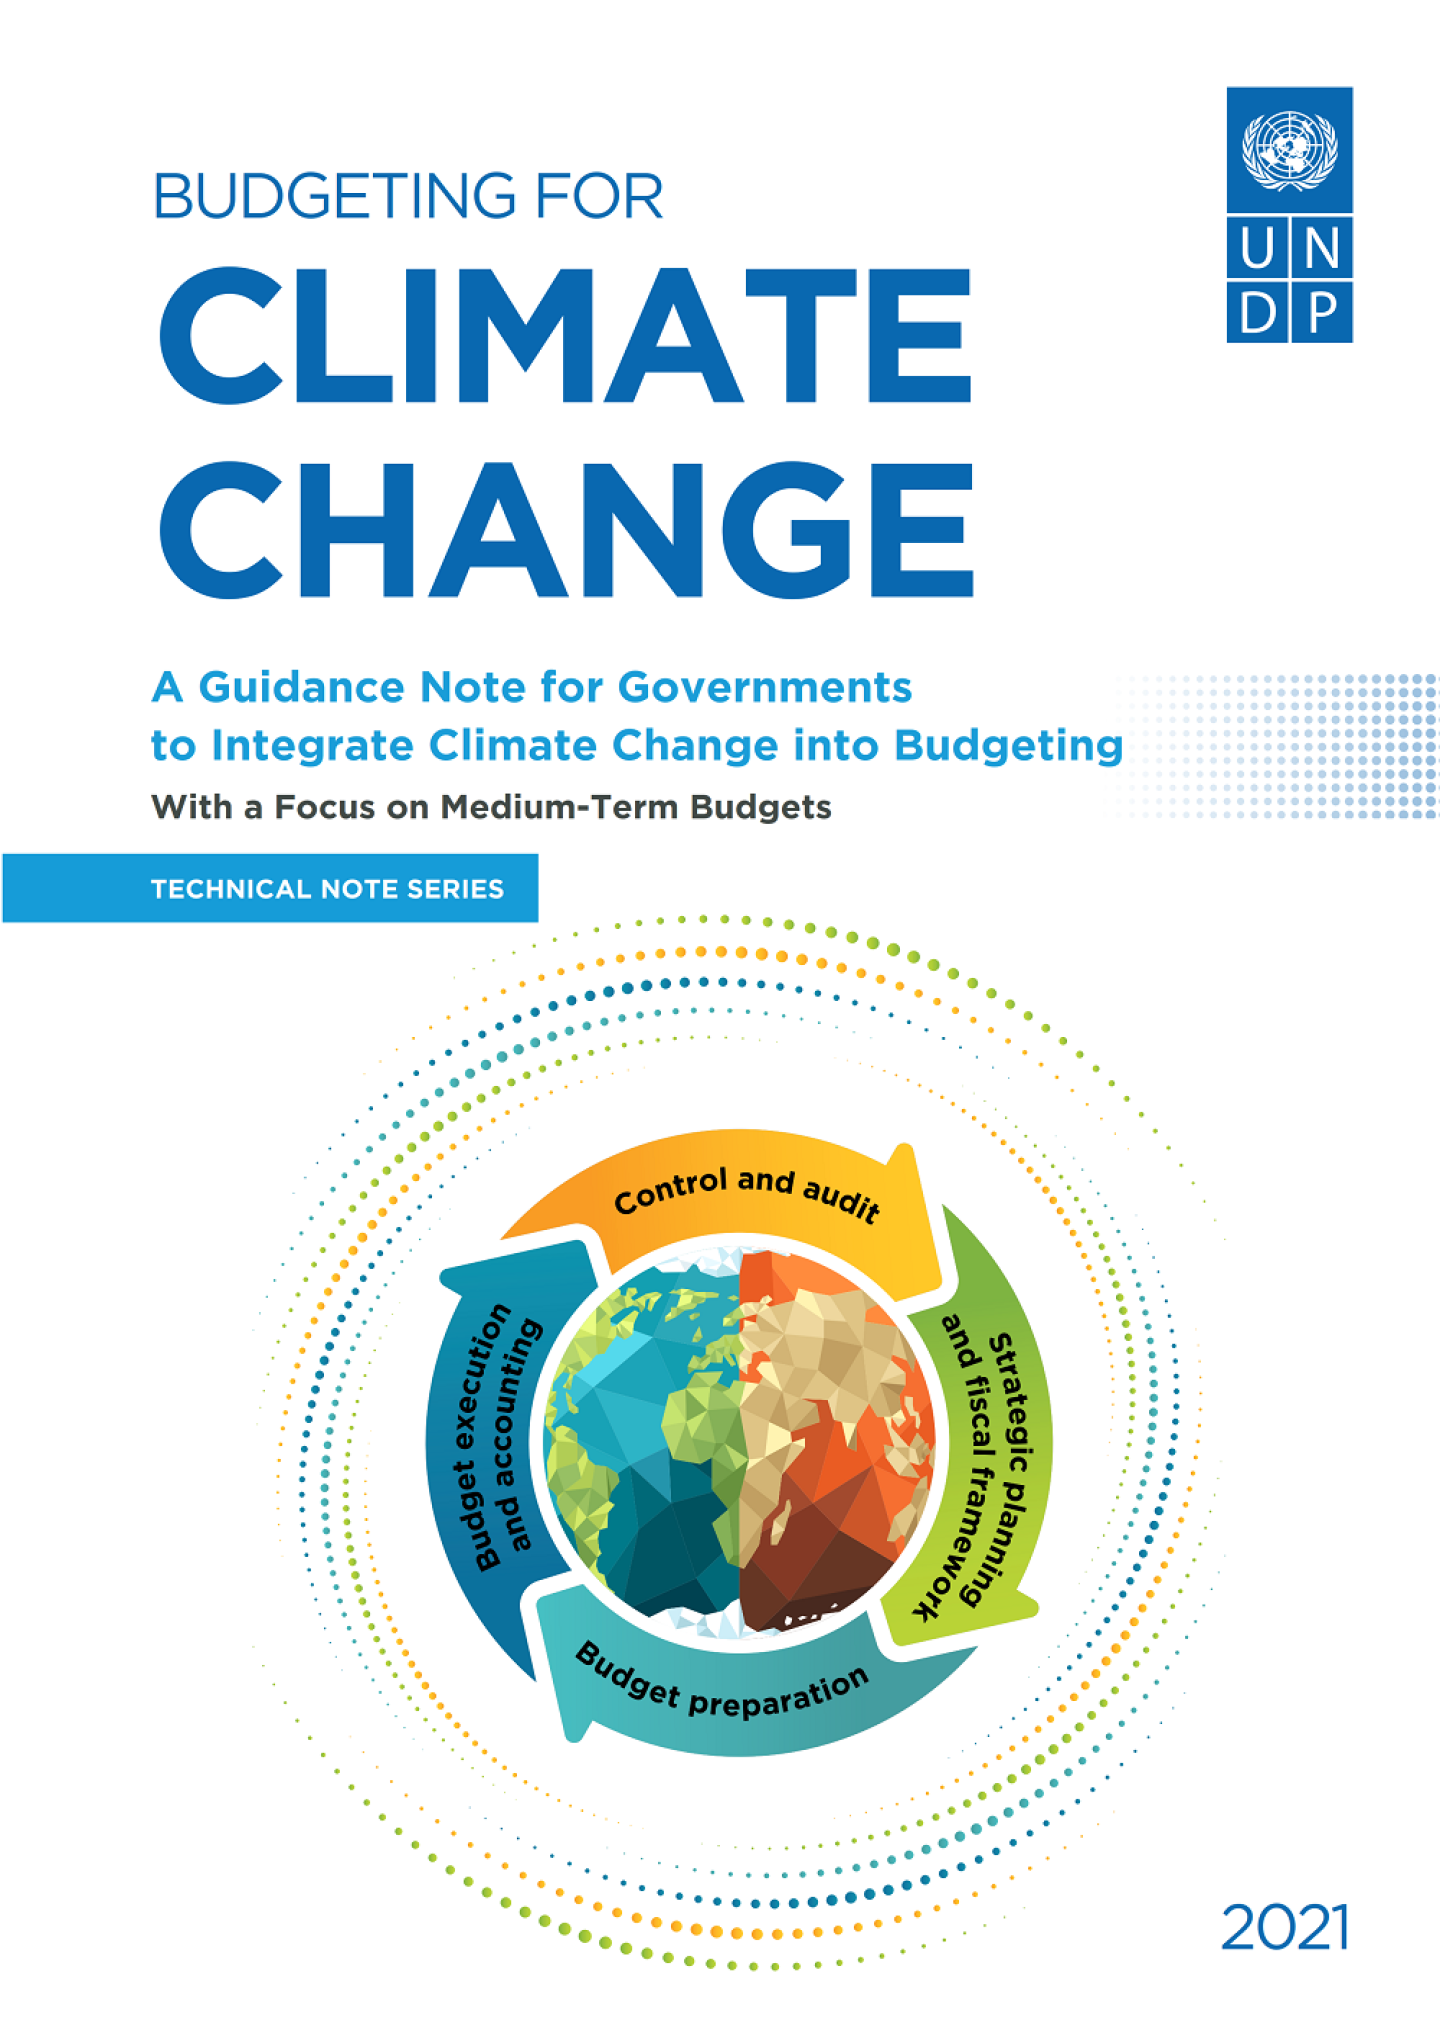 https://www.undp.org/sites/g/files/zskgke326/files/styles/scaled_image_large/public/2021-10/UNDP-RBAP-Budgeting-for-Climate-Change-Guidance-Note-2021-cover.png?itok=EbzwtJL-